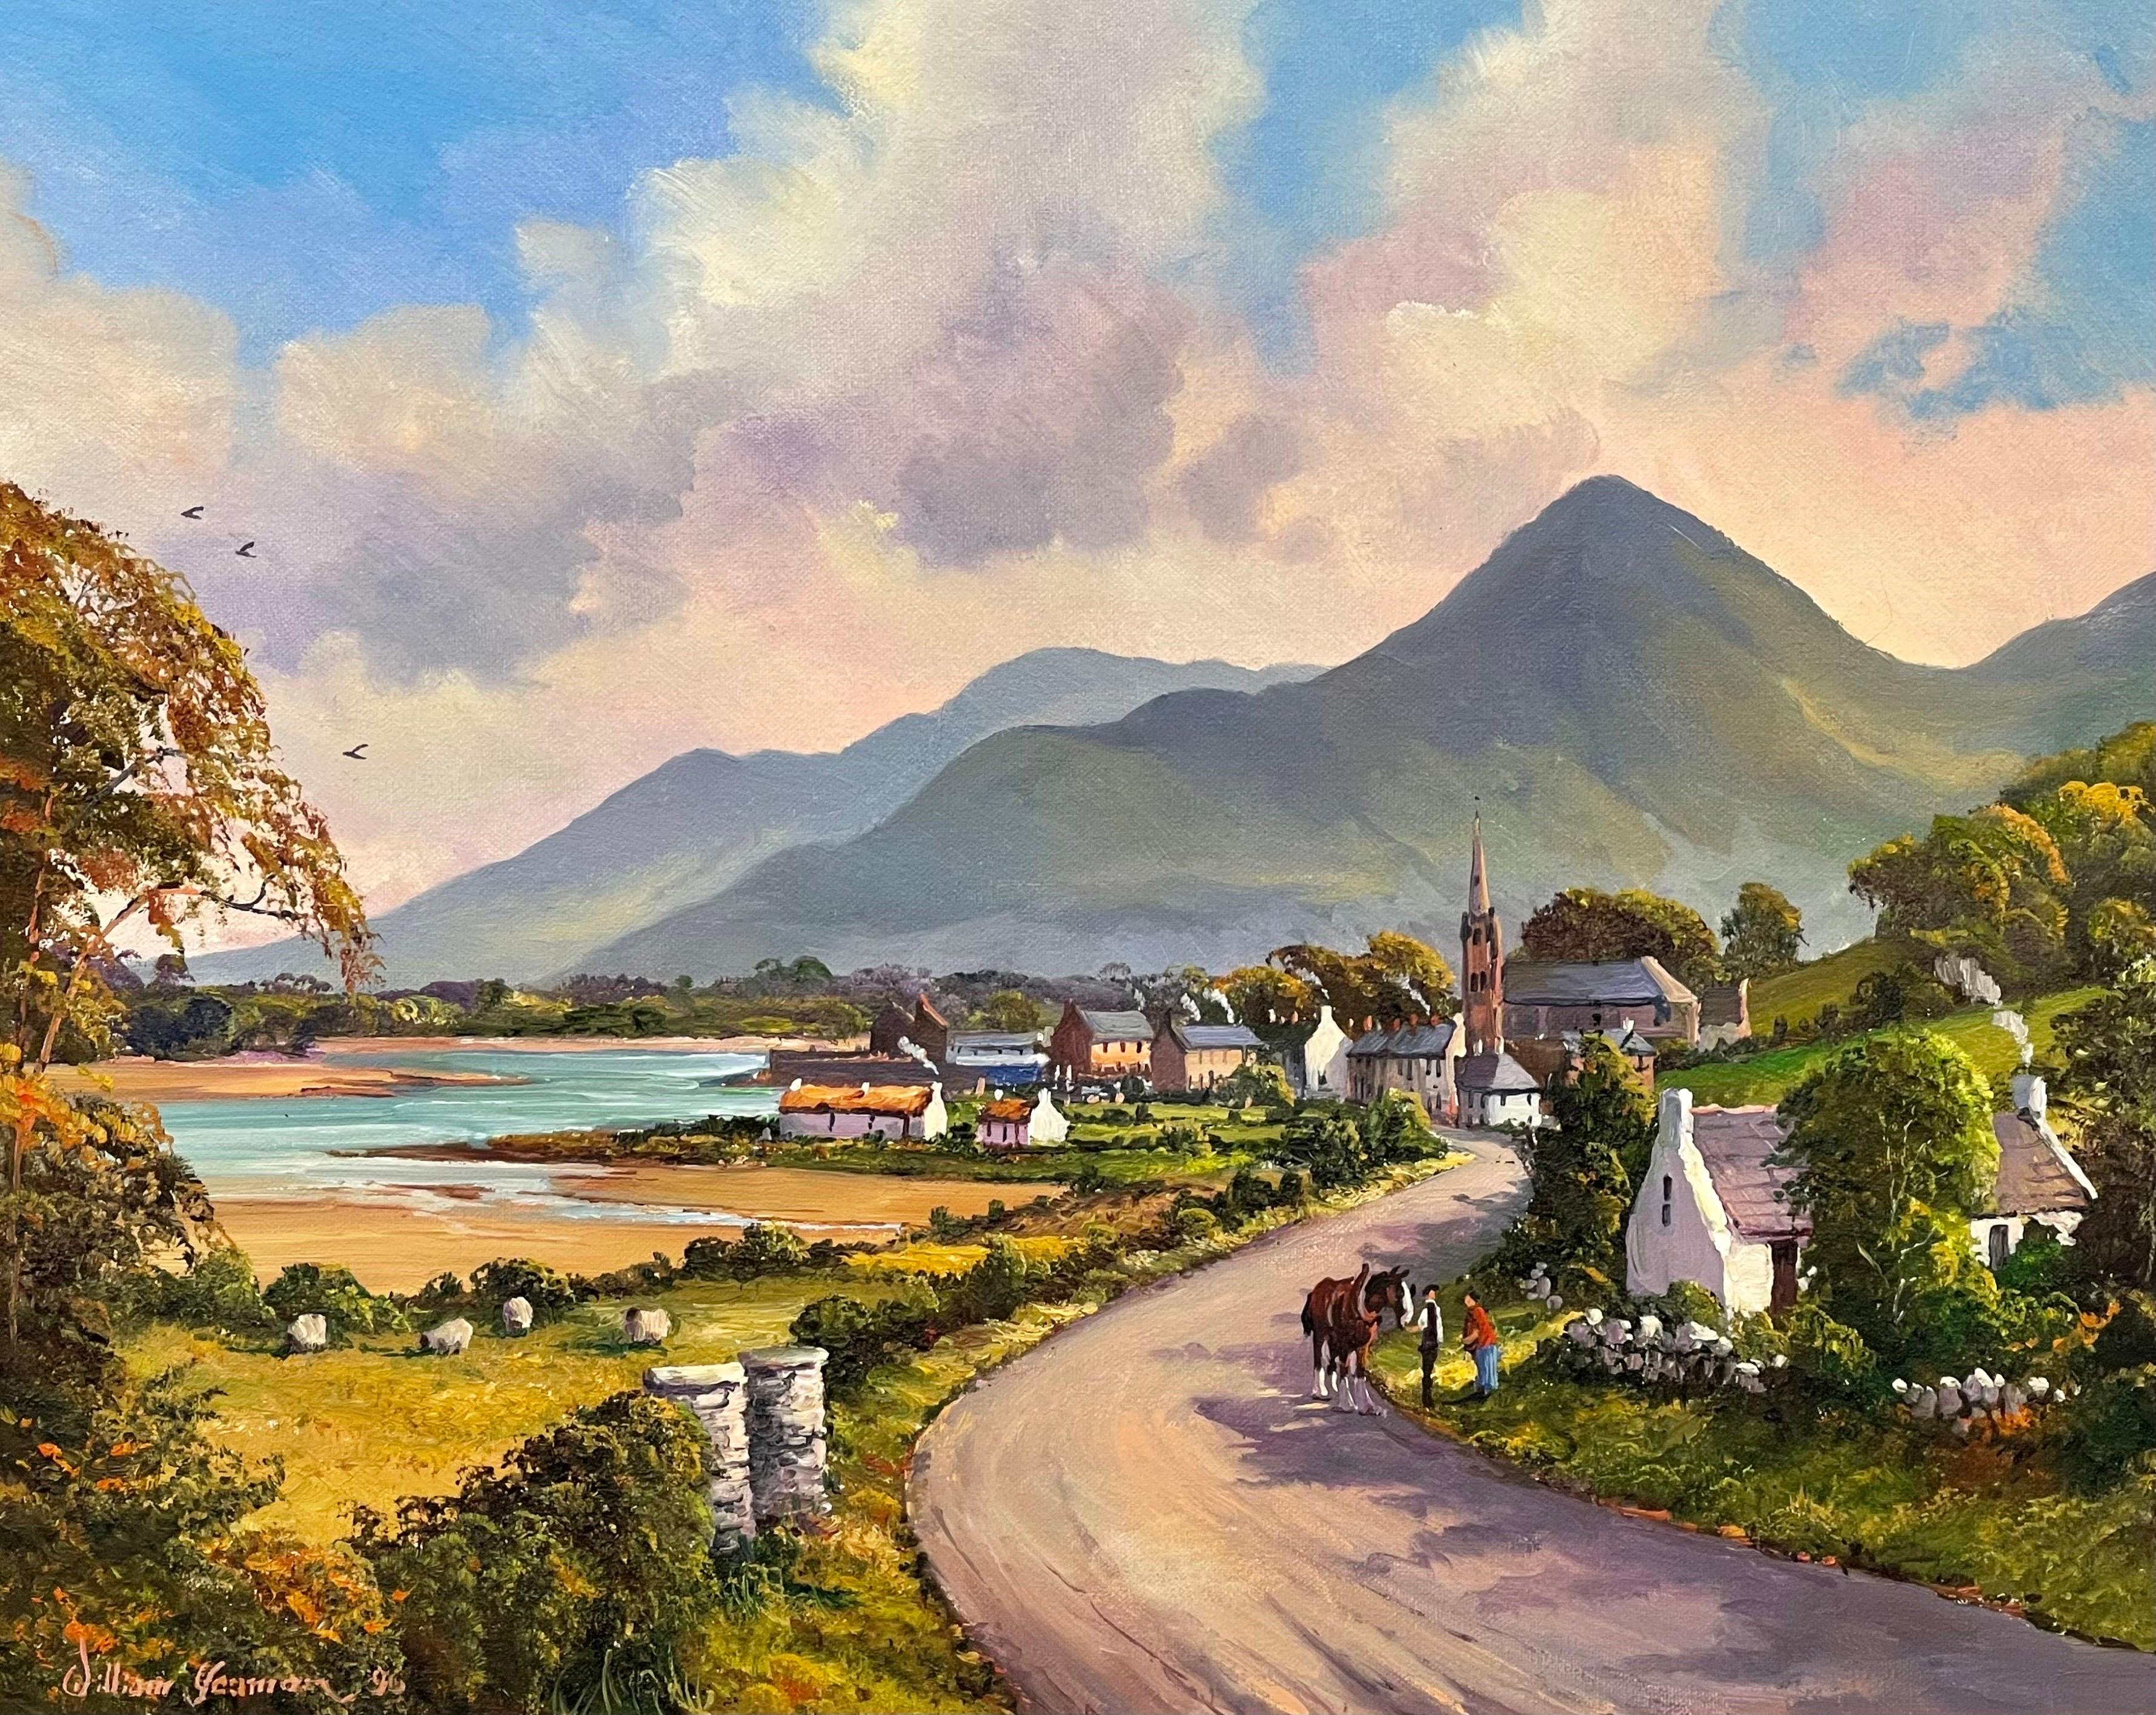 Figures on the road to Dundrum Ireland in the Irish Mountain Landscape by William Yeaman. Original, Oil on Canvas presented in an ornate frame.

Art measures 20 x 16 inches 
Frame measures 24 x 20 inches 

